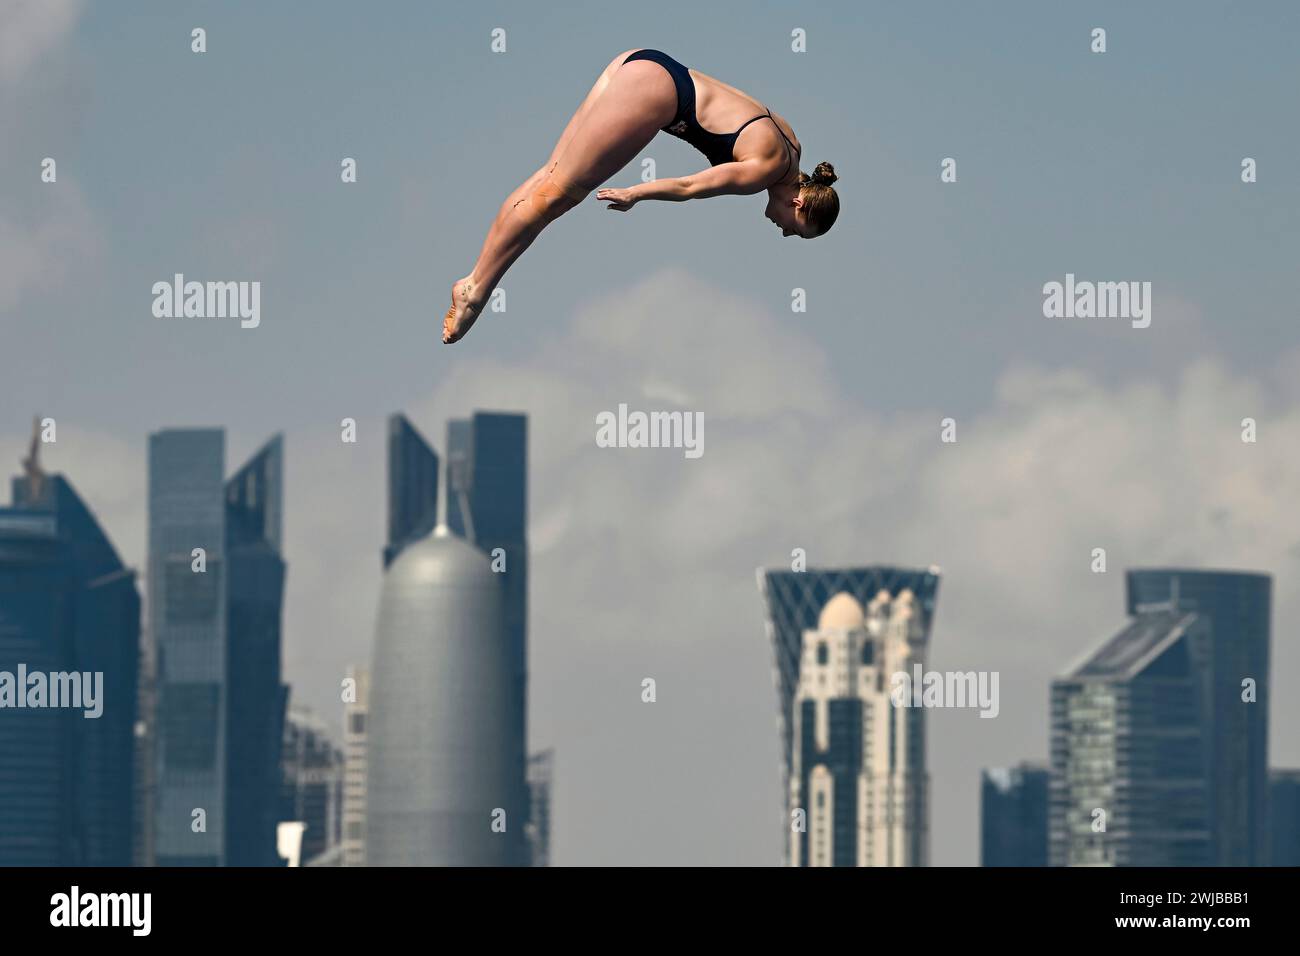 Doha, Qatar. 14th Feb, 2024. Molly Carlson of Canada competes in the high diving 20m Platform Women Round 3 - 4 during the 21st World Aquatics Championships at the Old Doha Port in Doha (Qatar), February 14, 2024. Credit: Insidefoto di andrea staccioli/Alamy Live News Stock Photo